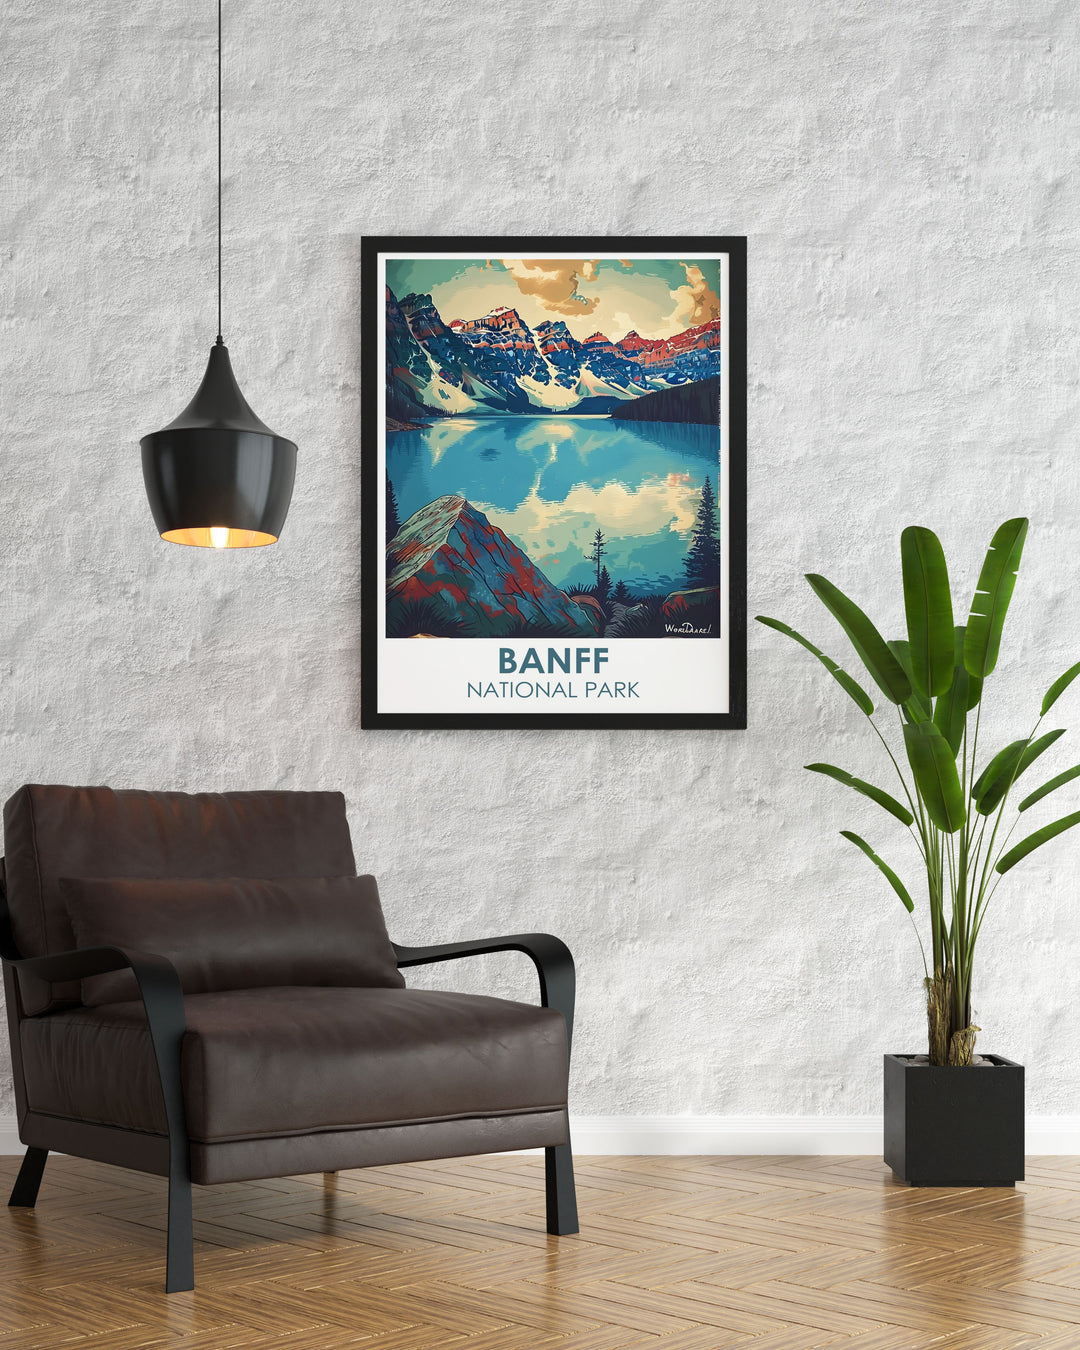 Poster of Banff National Park with a panoramic view of the iconic Moraine Lake, perfect for those who appreciate the beauty of Canadas natural landscapes.